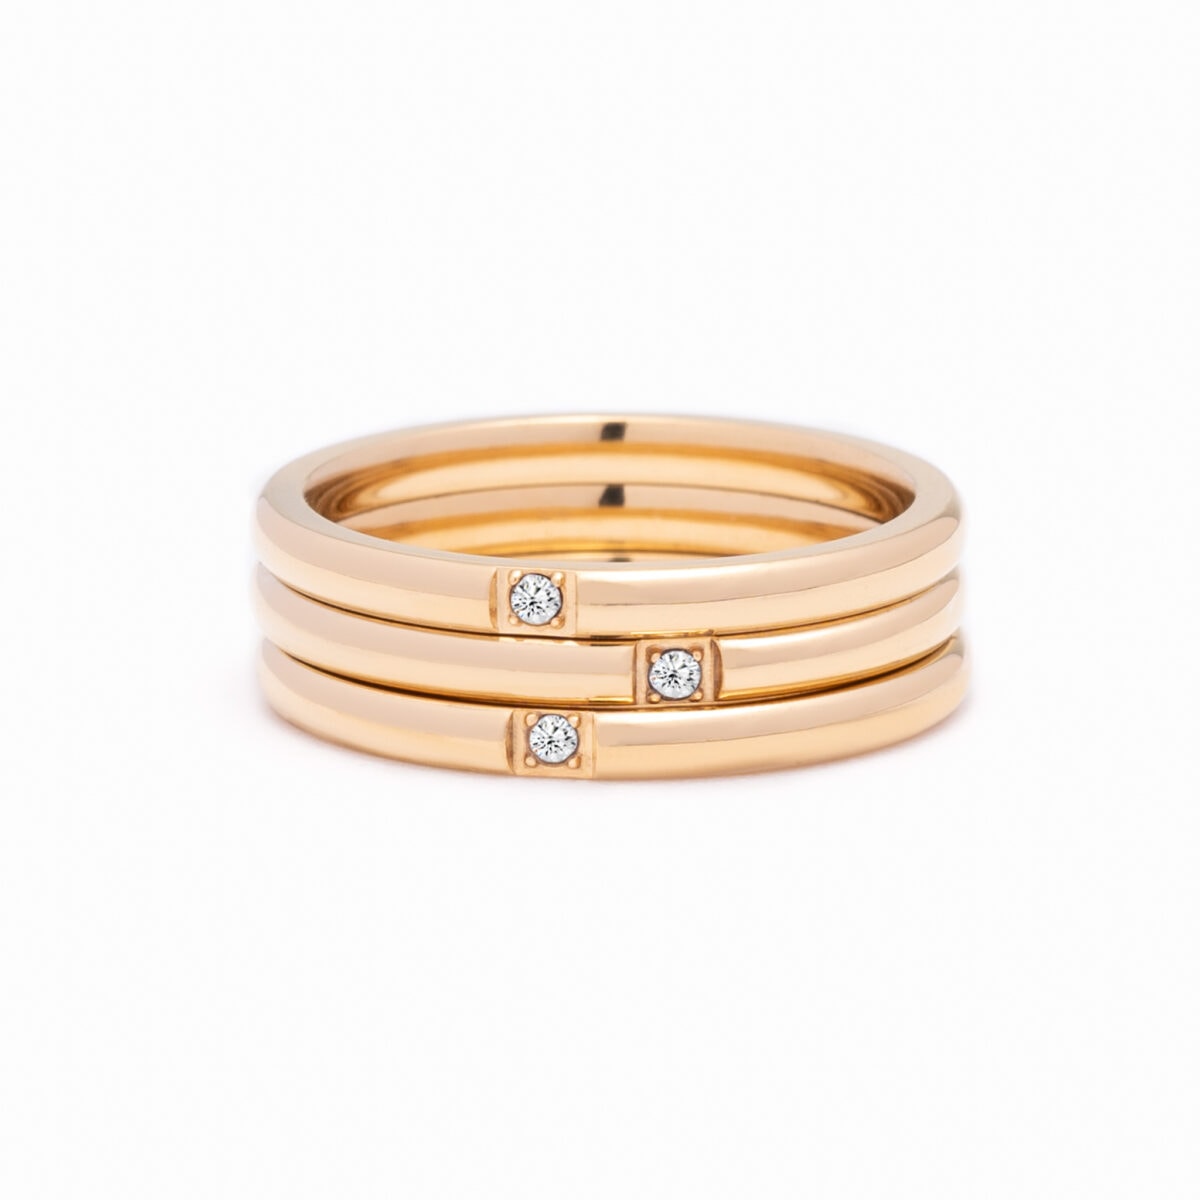 https://m.clubbella.co/product/spark-solitaire-minimal-ring/ Spark solitaire Minimal RIng (3)